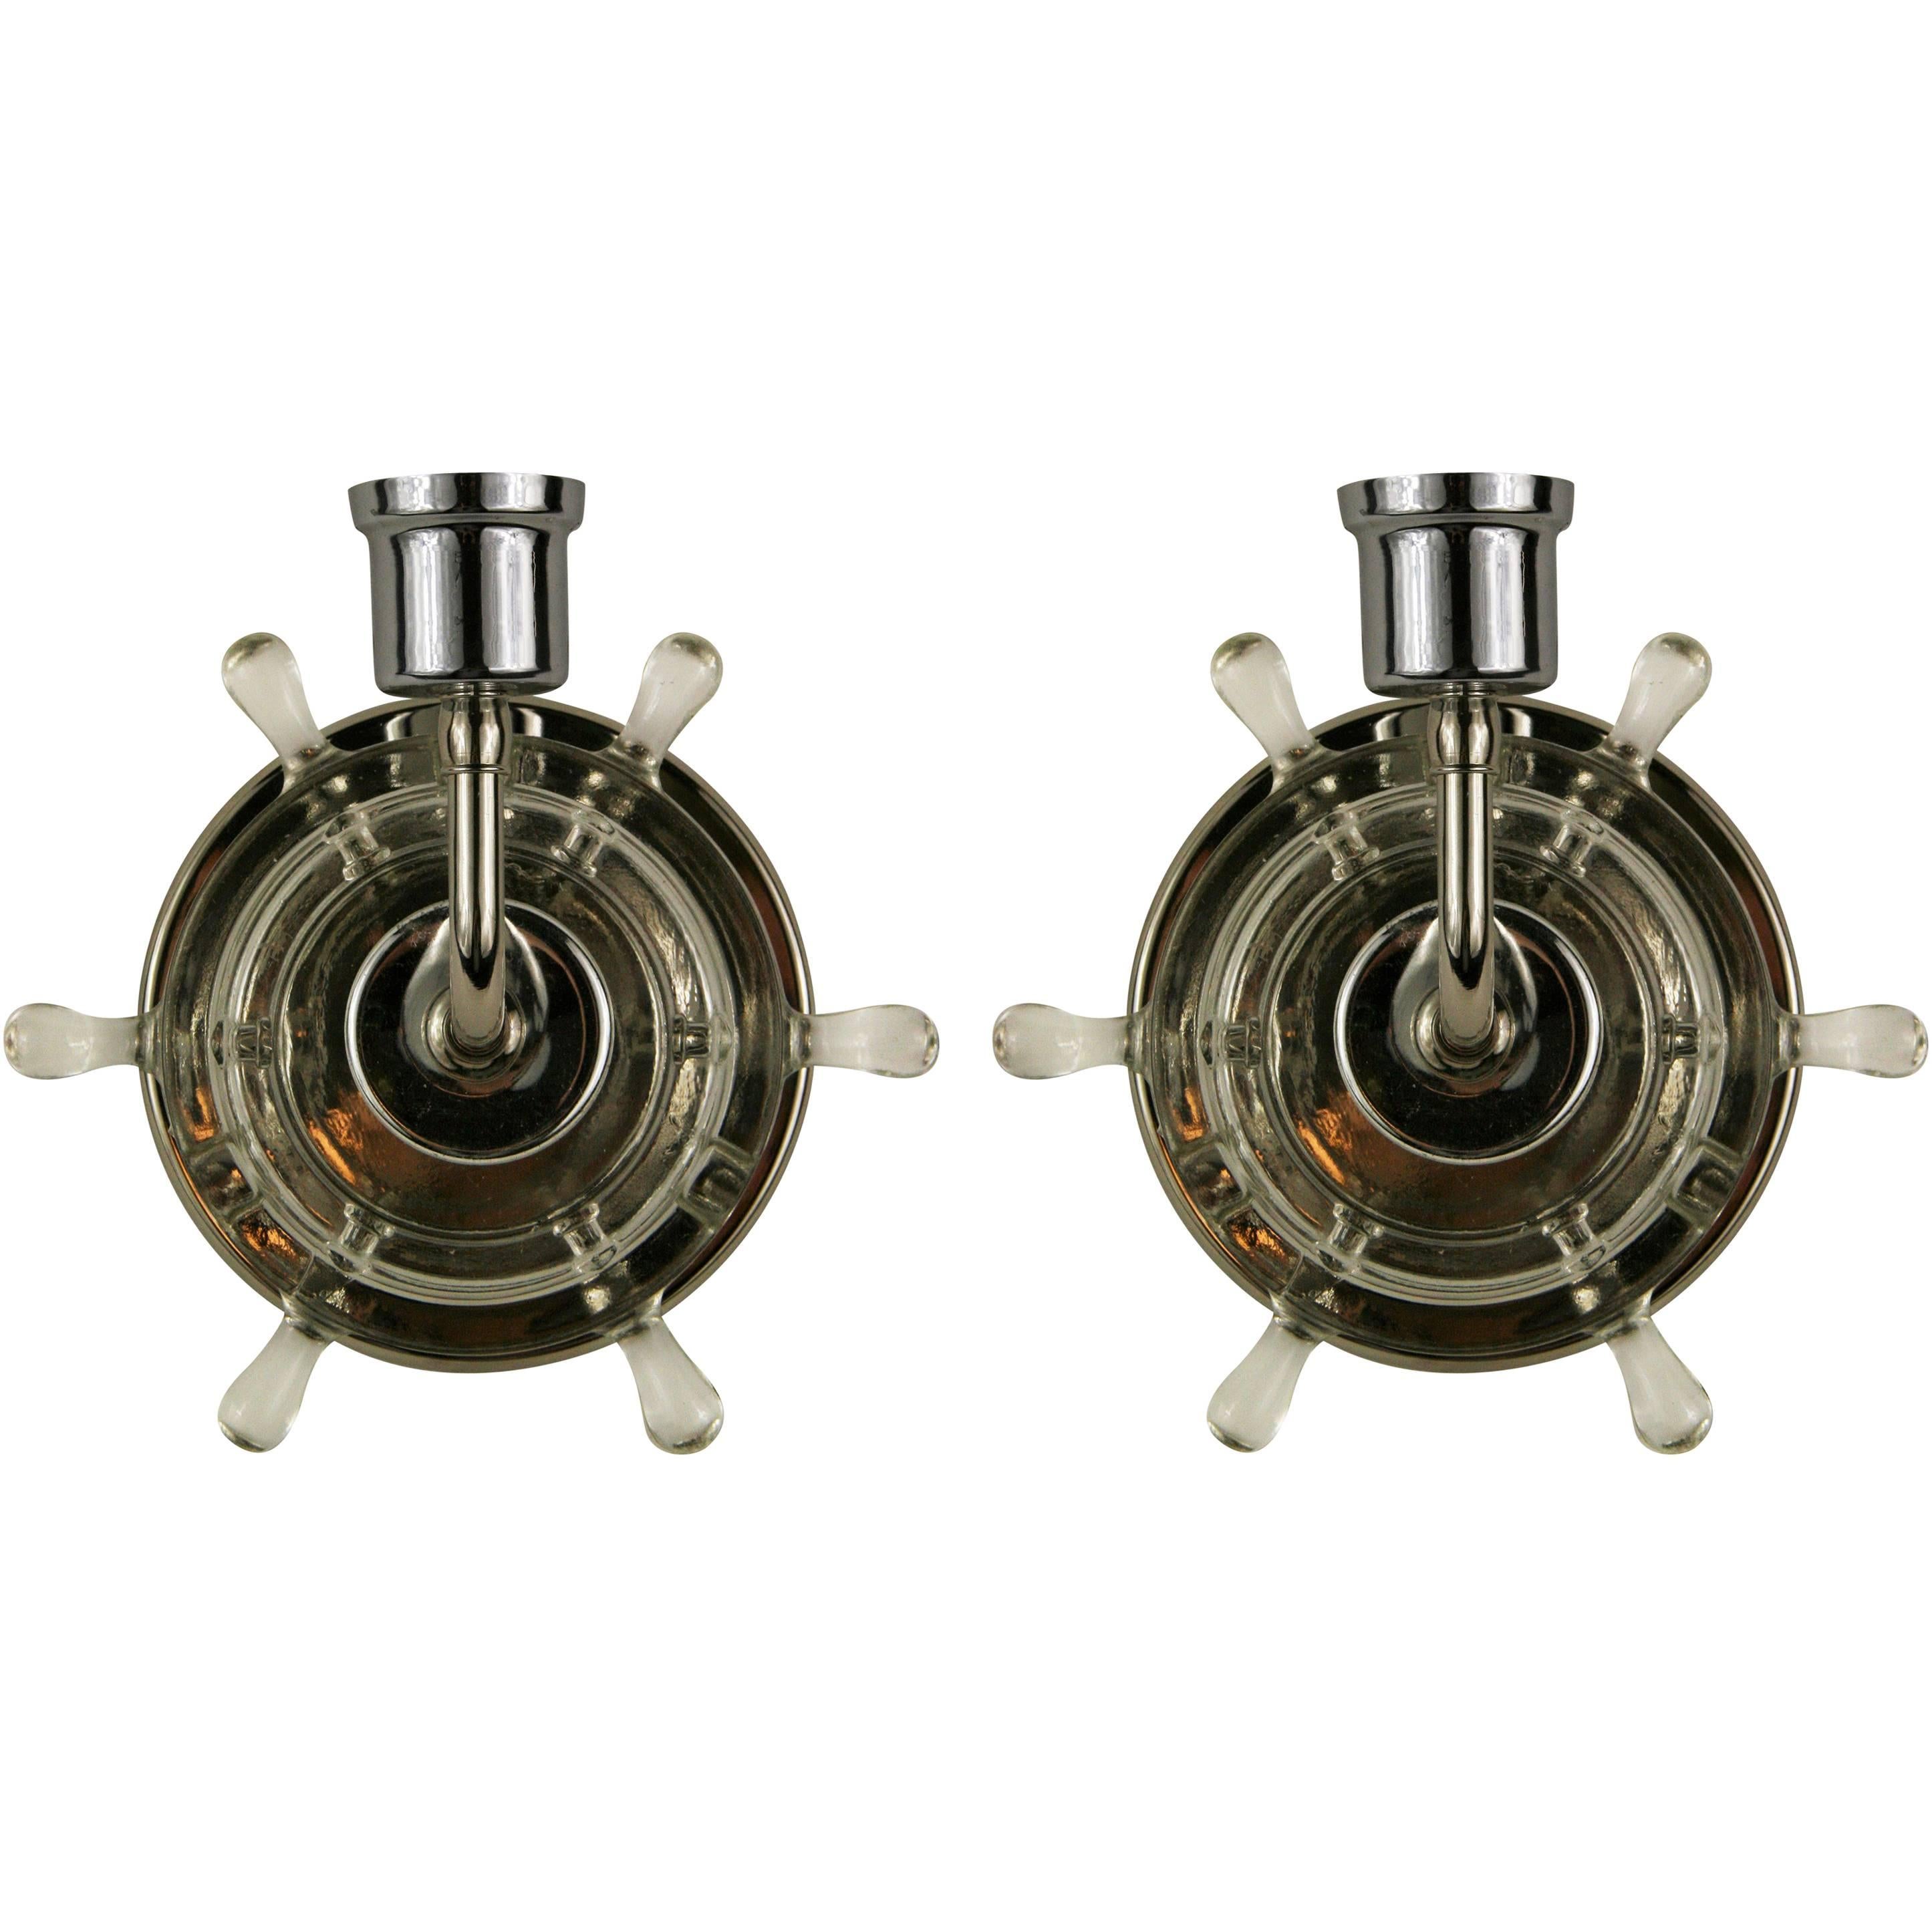 #2-1801b. A pair of nautical glass ships wheel sconces with nickel hardware. Takes one 60 W candelabra base bulb.
  